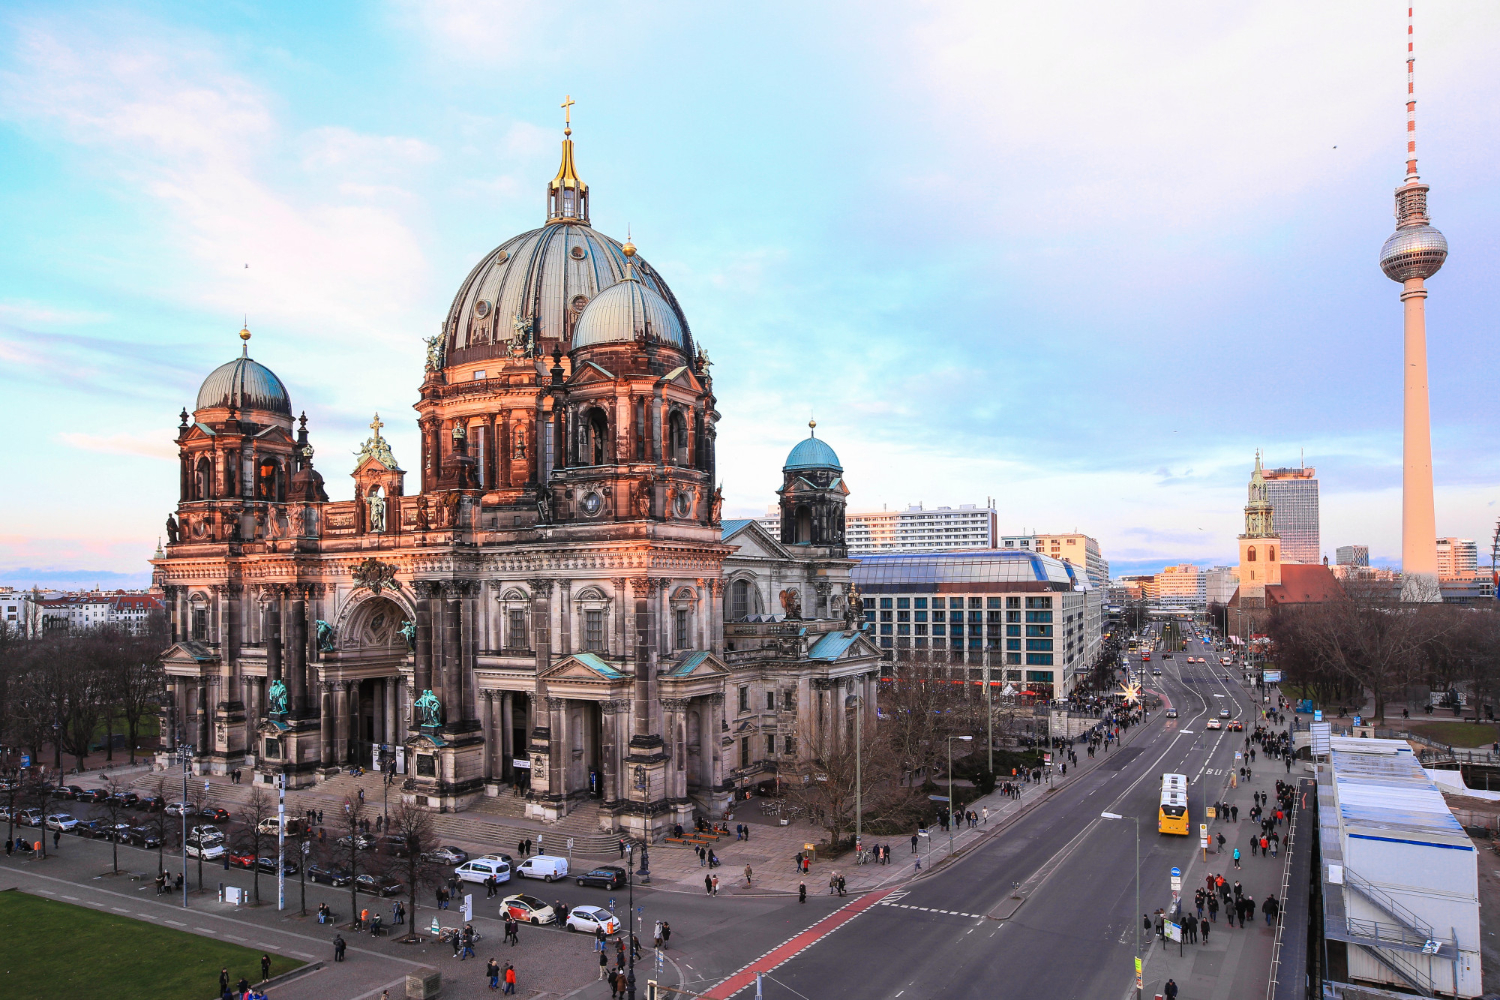 full-tourists-enjoy-visiting-berlin-cathedral-berliner-dome-daytime-berlin-germany